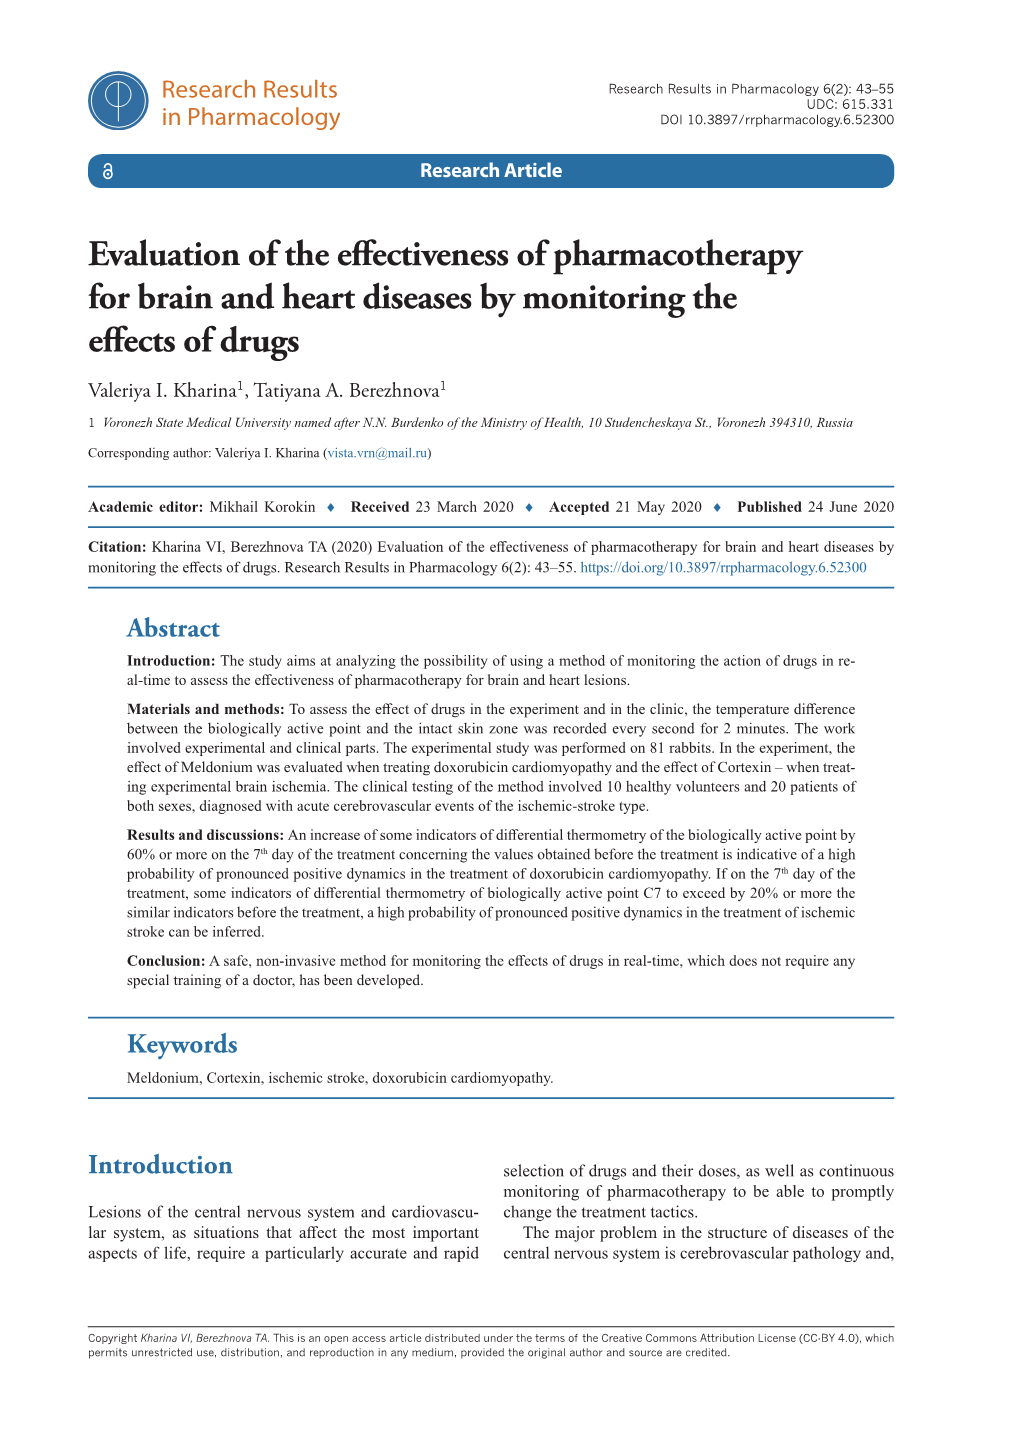 ﻿Evaluation of the Effectiveness of Pharmacotherapy for Brain And